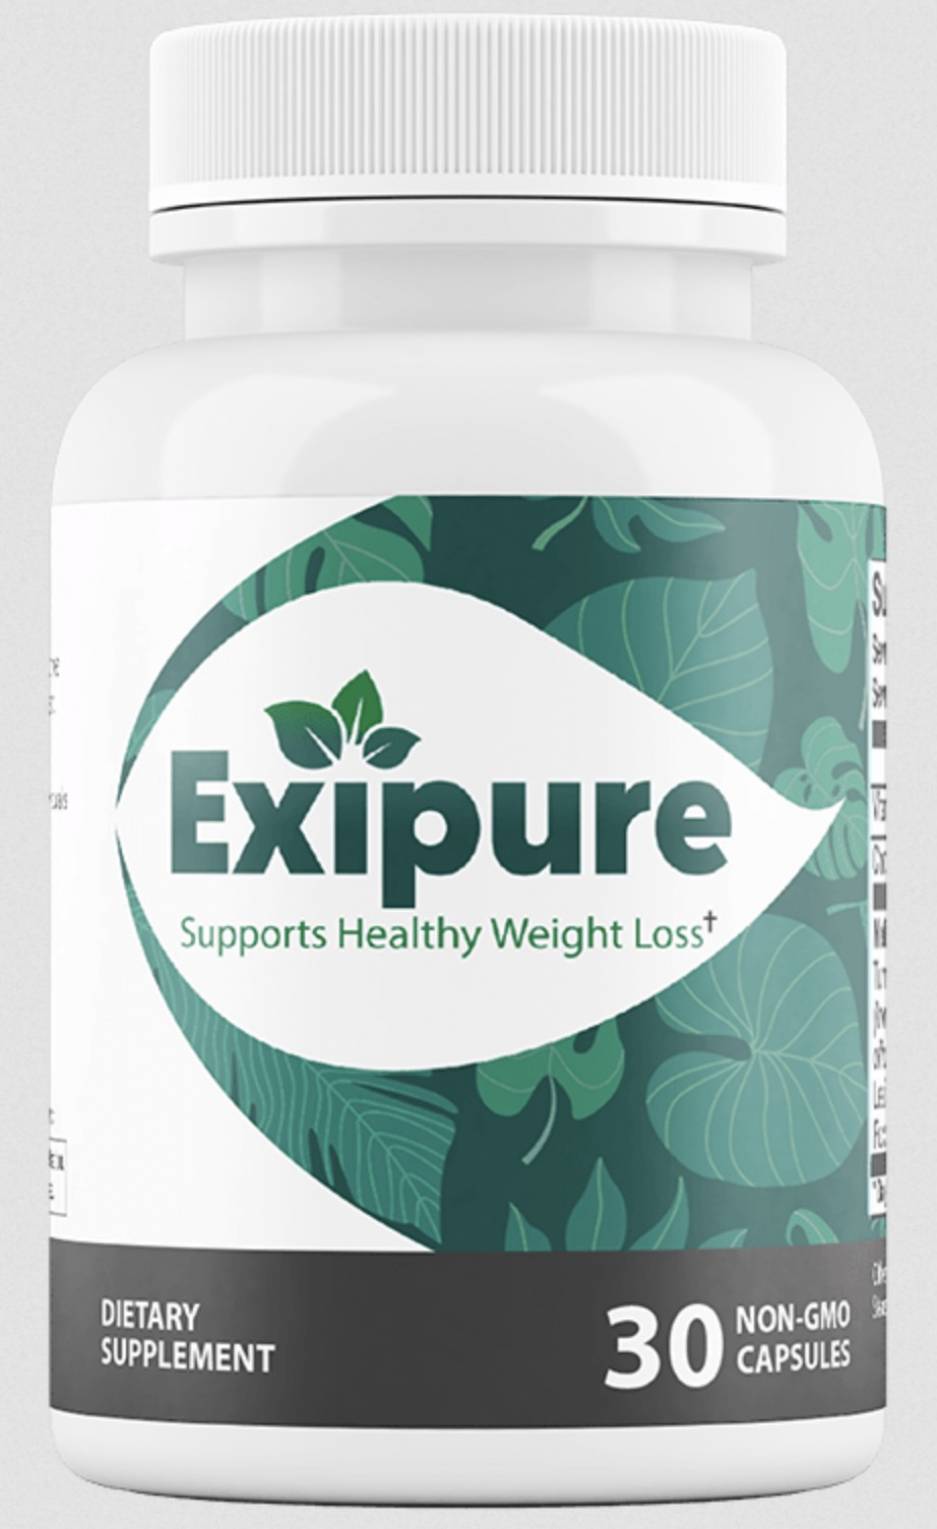 Reviews Of Exipure Supplement